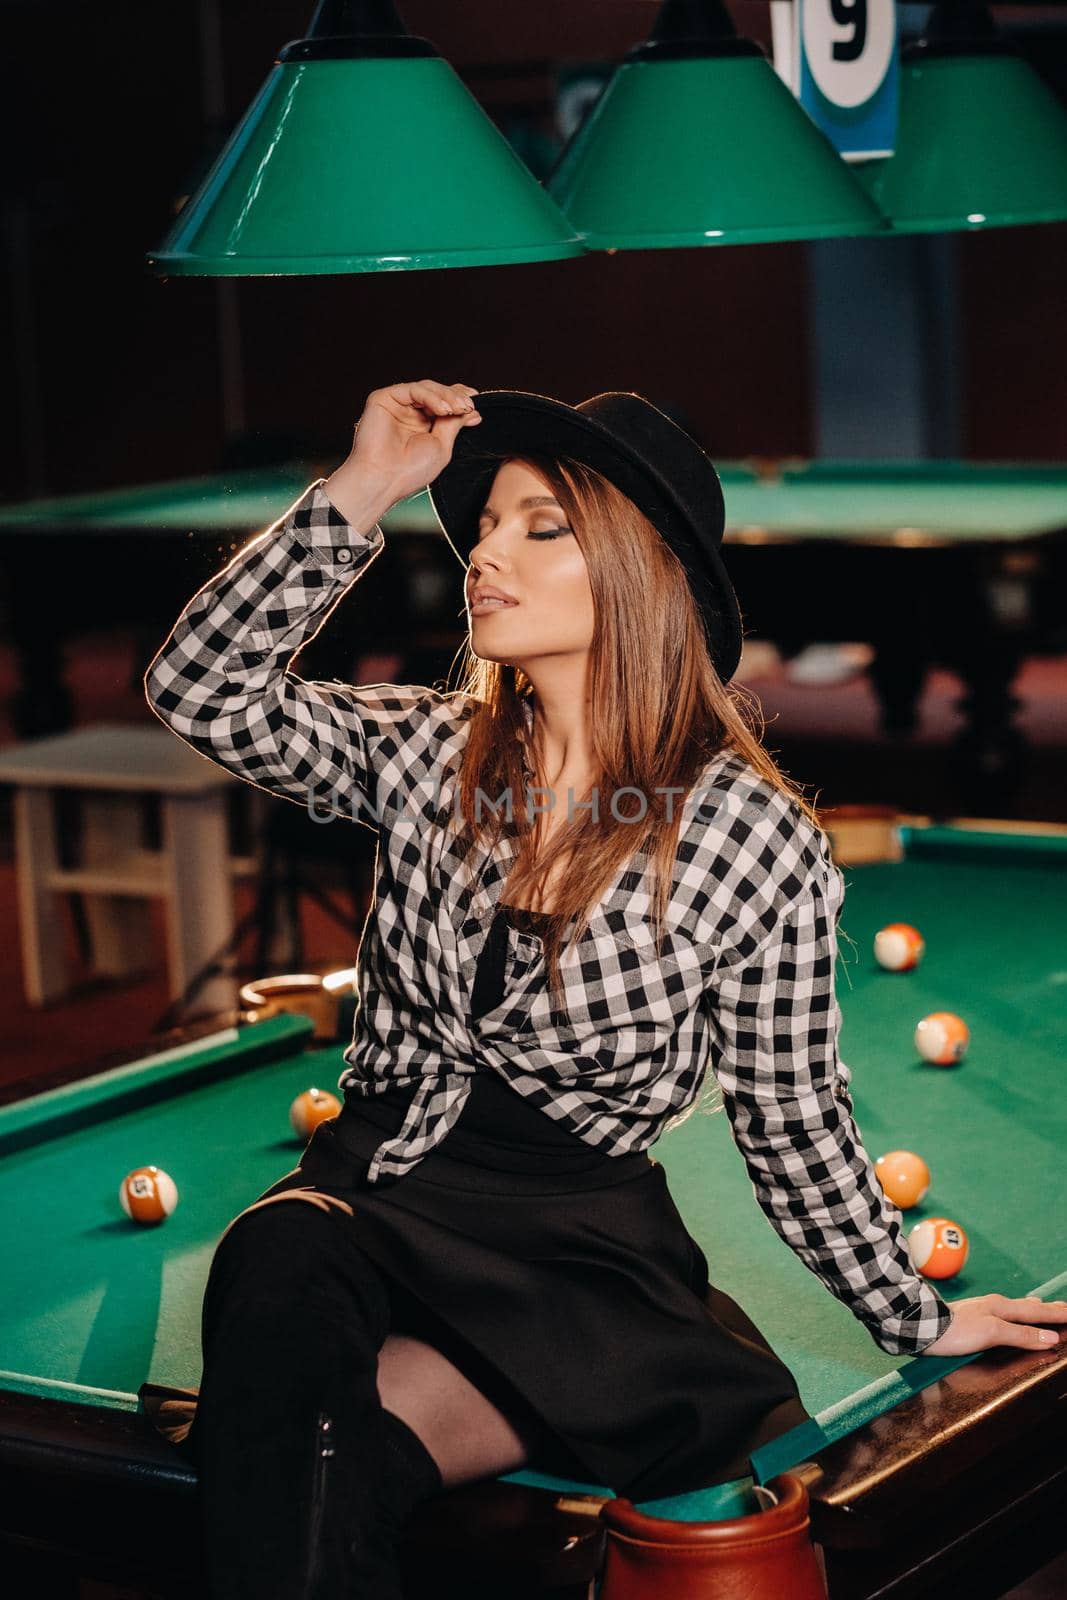 A girl in a hat in a billiard club sits on a billiard table.Playing pool by Lobachad